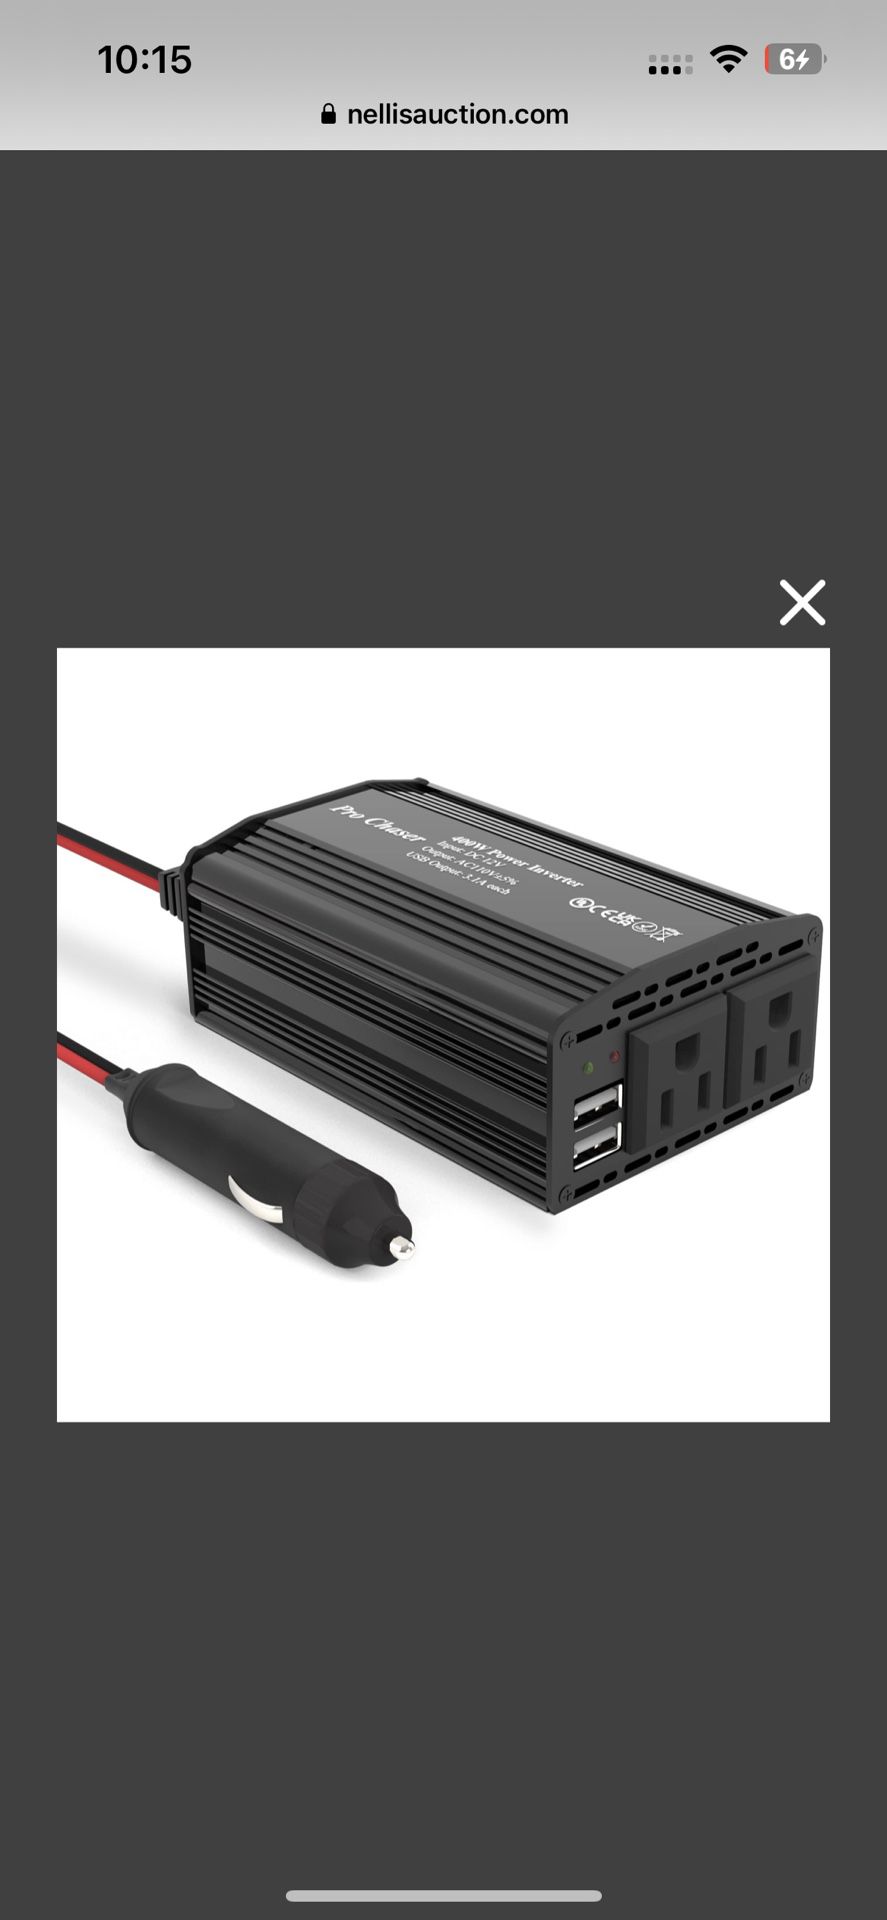 Pro Chaser 400W Power Inverter 12V DC To 110V AC Car Truck RV Inverter 6.2A Dual USB Charging Ports For Road Trips (Black)